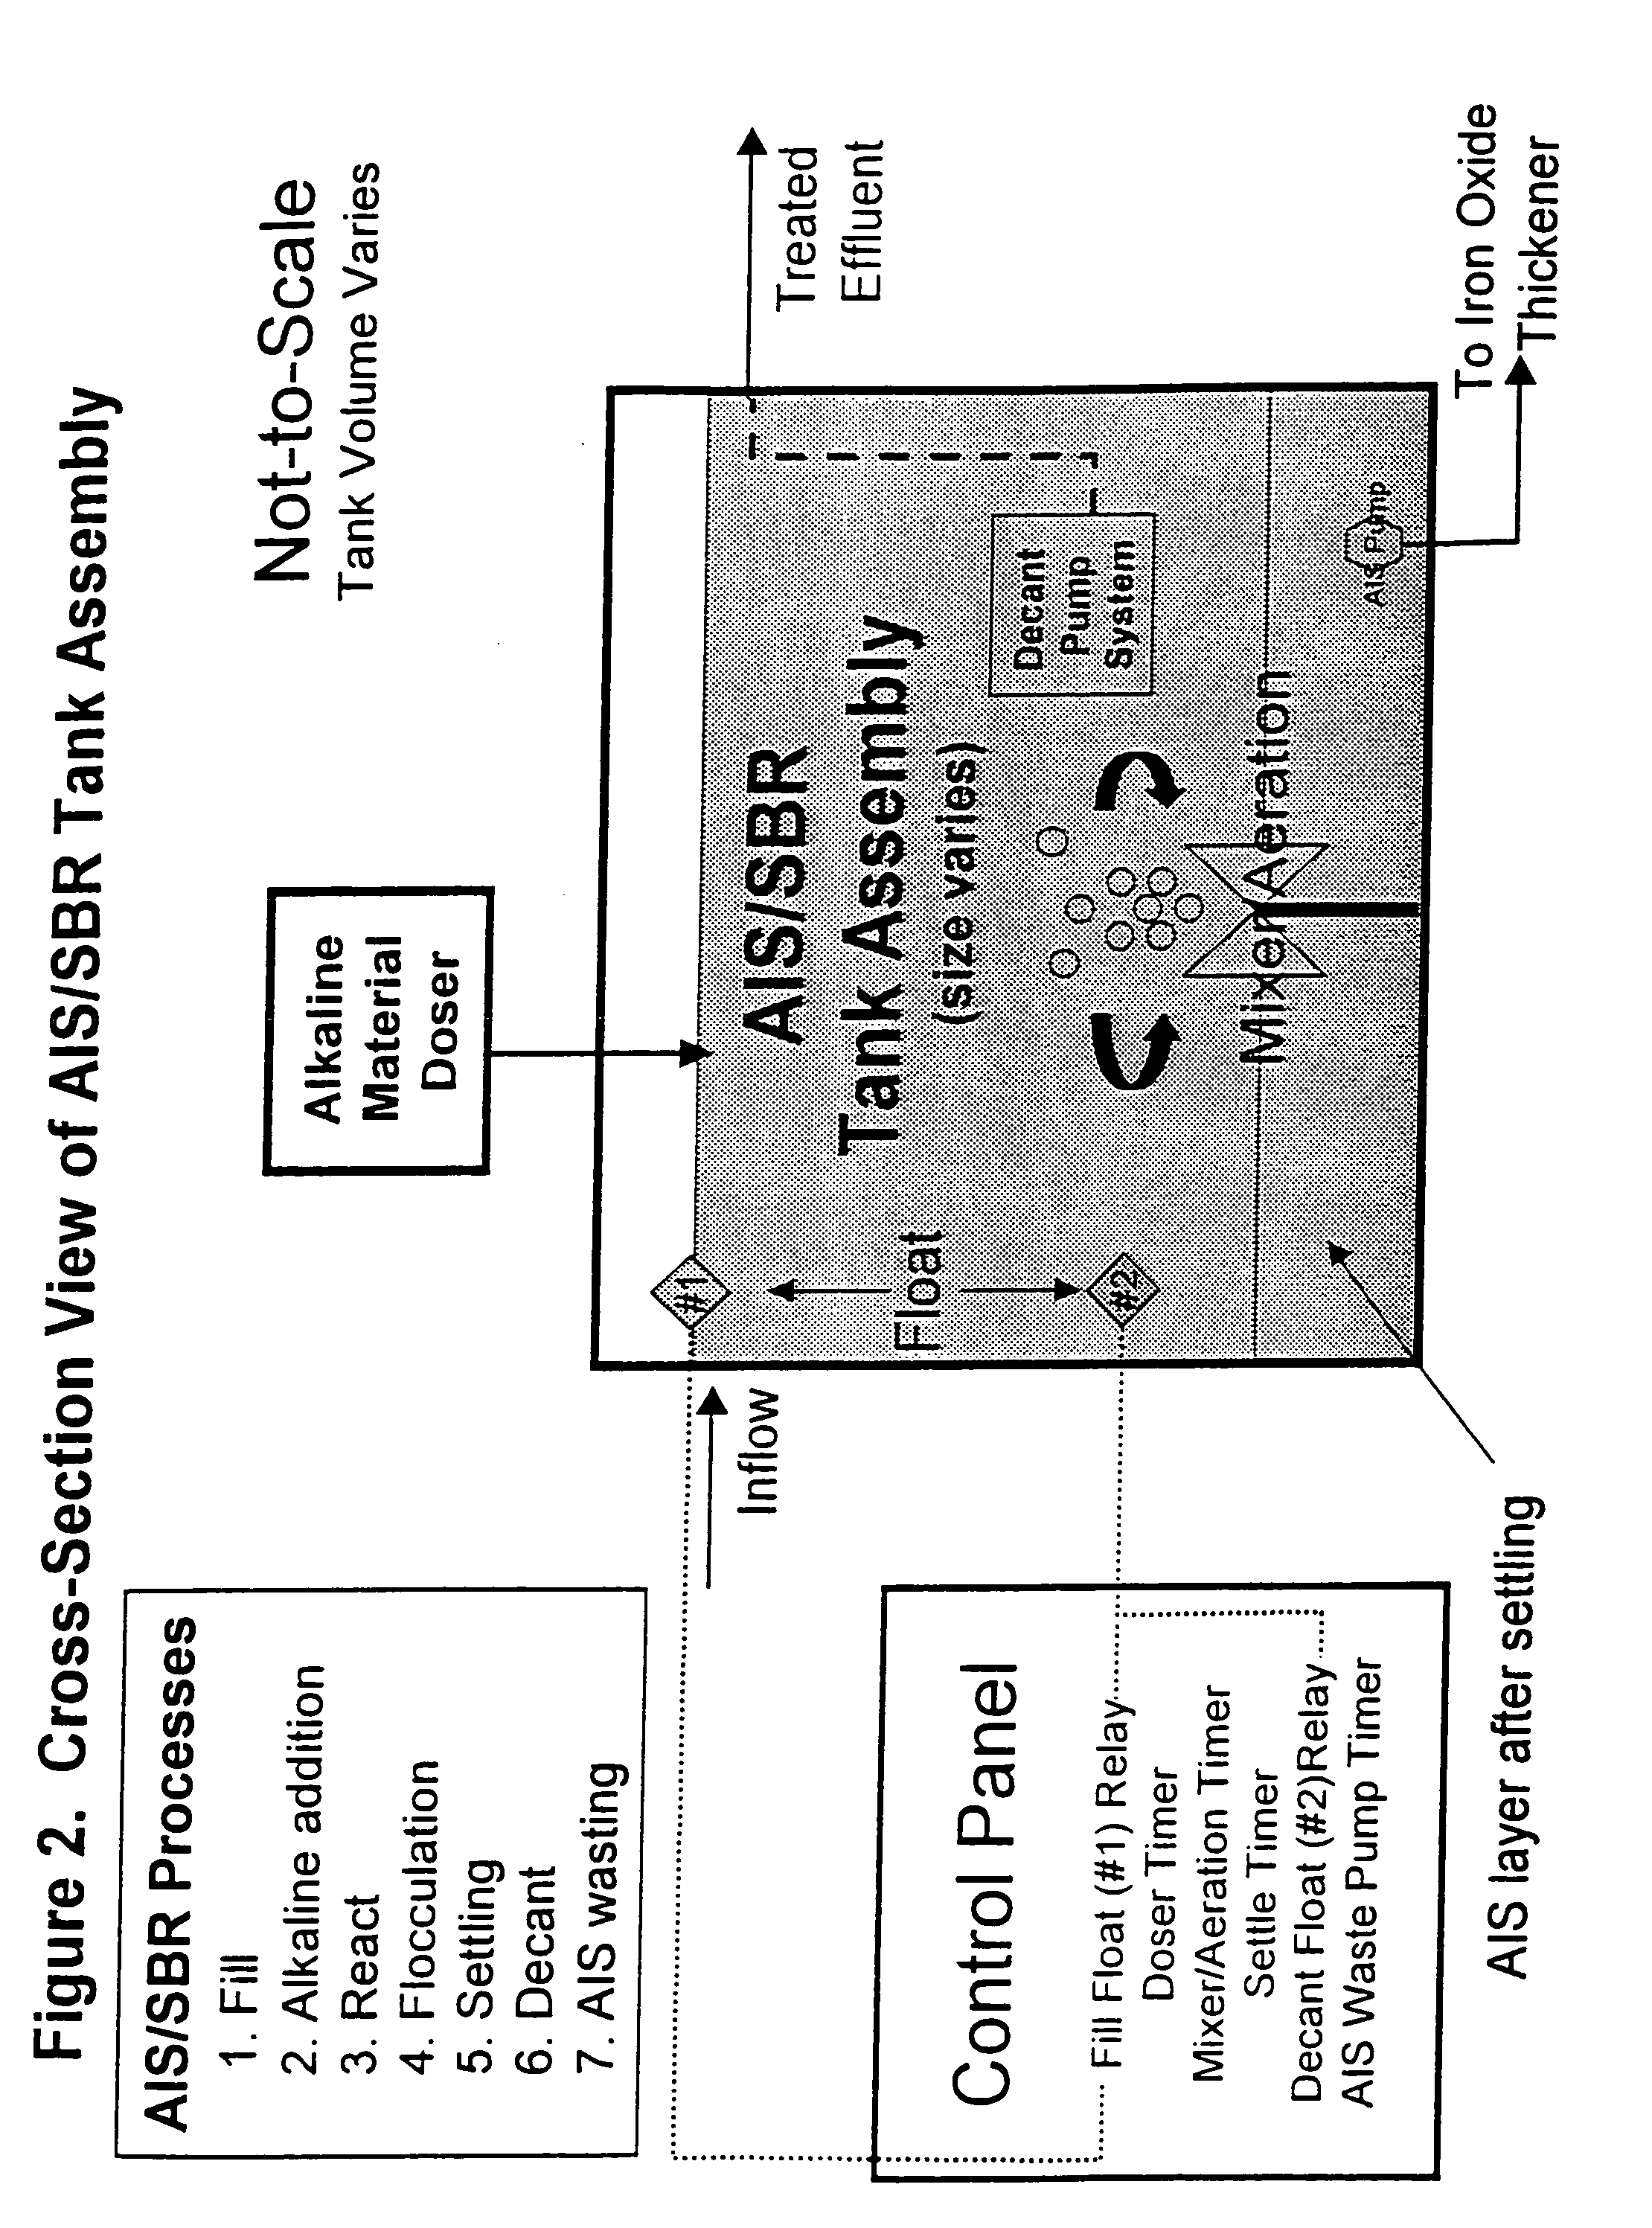 Treatment of iron contaminated liquids with an activated iron solids (AIS) process